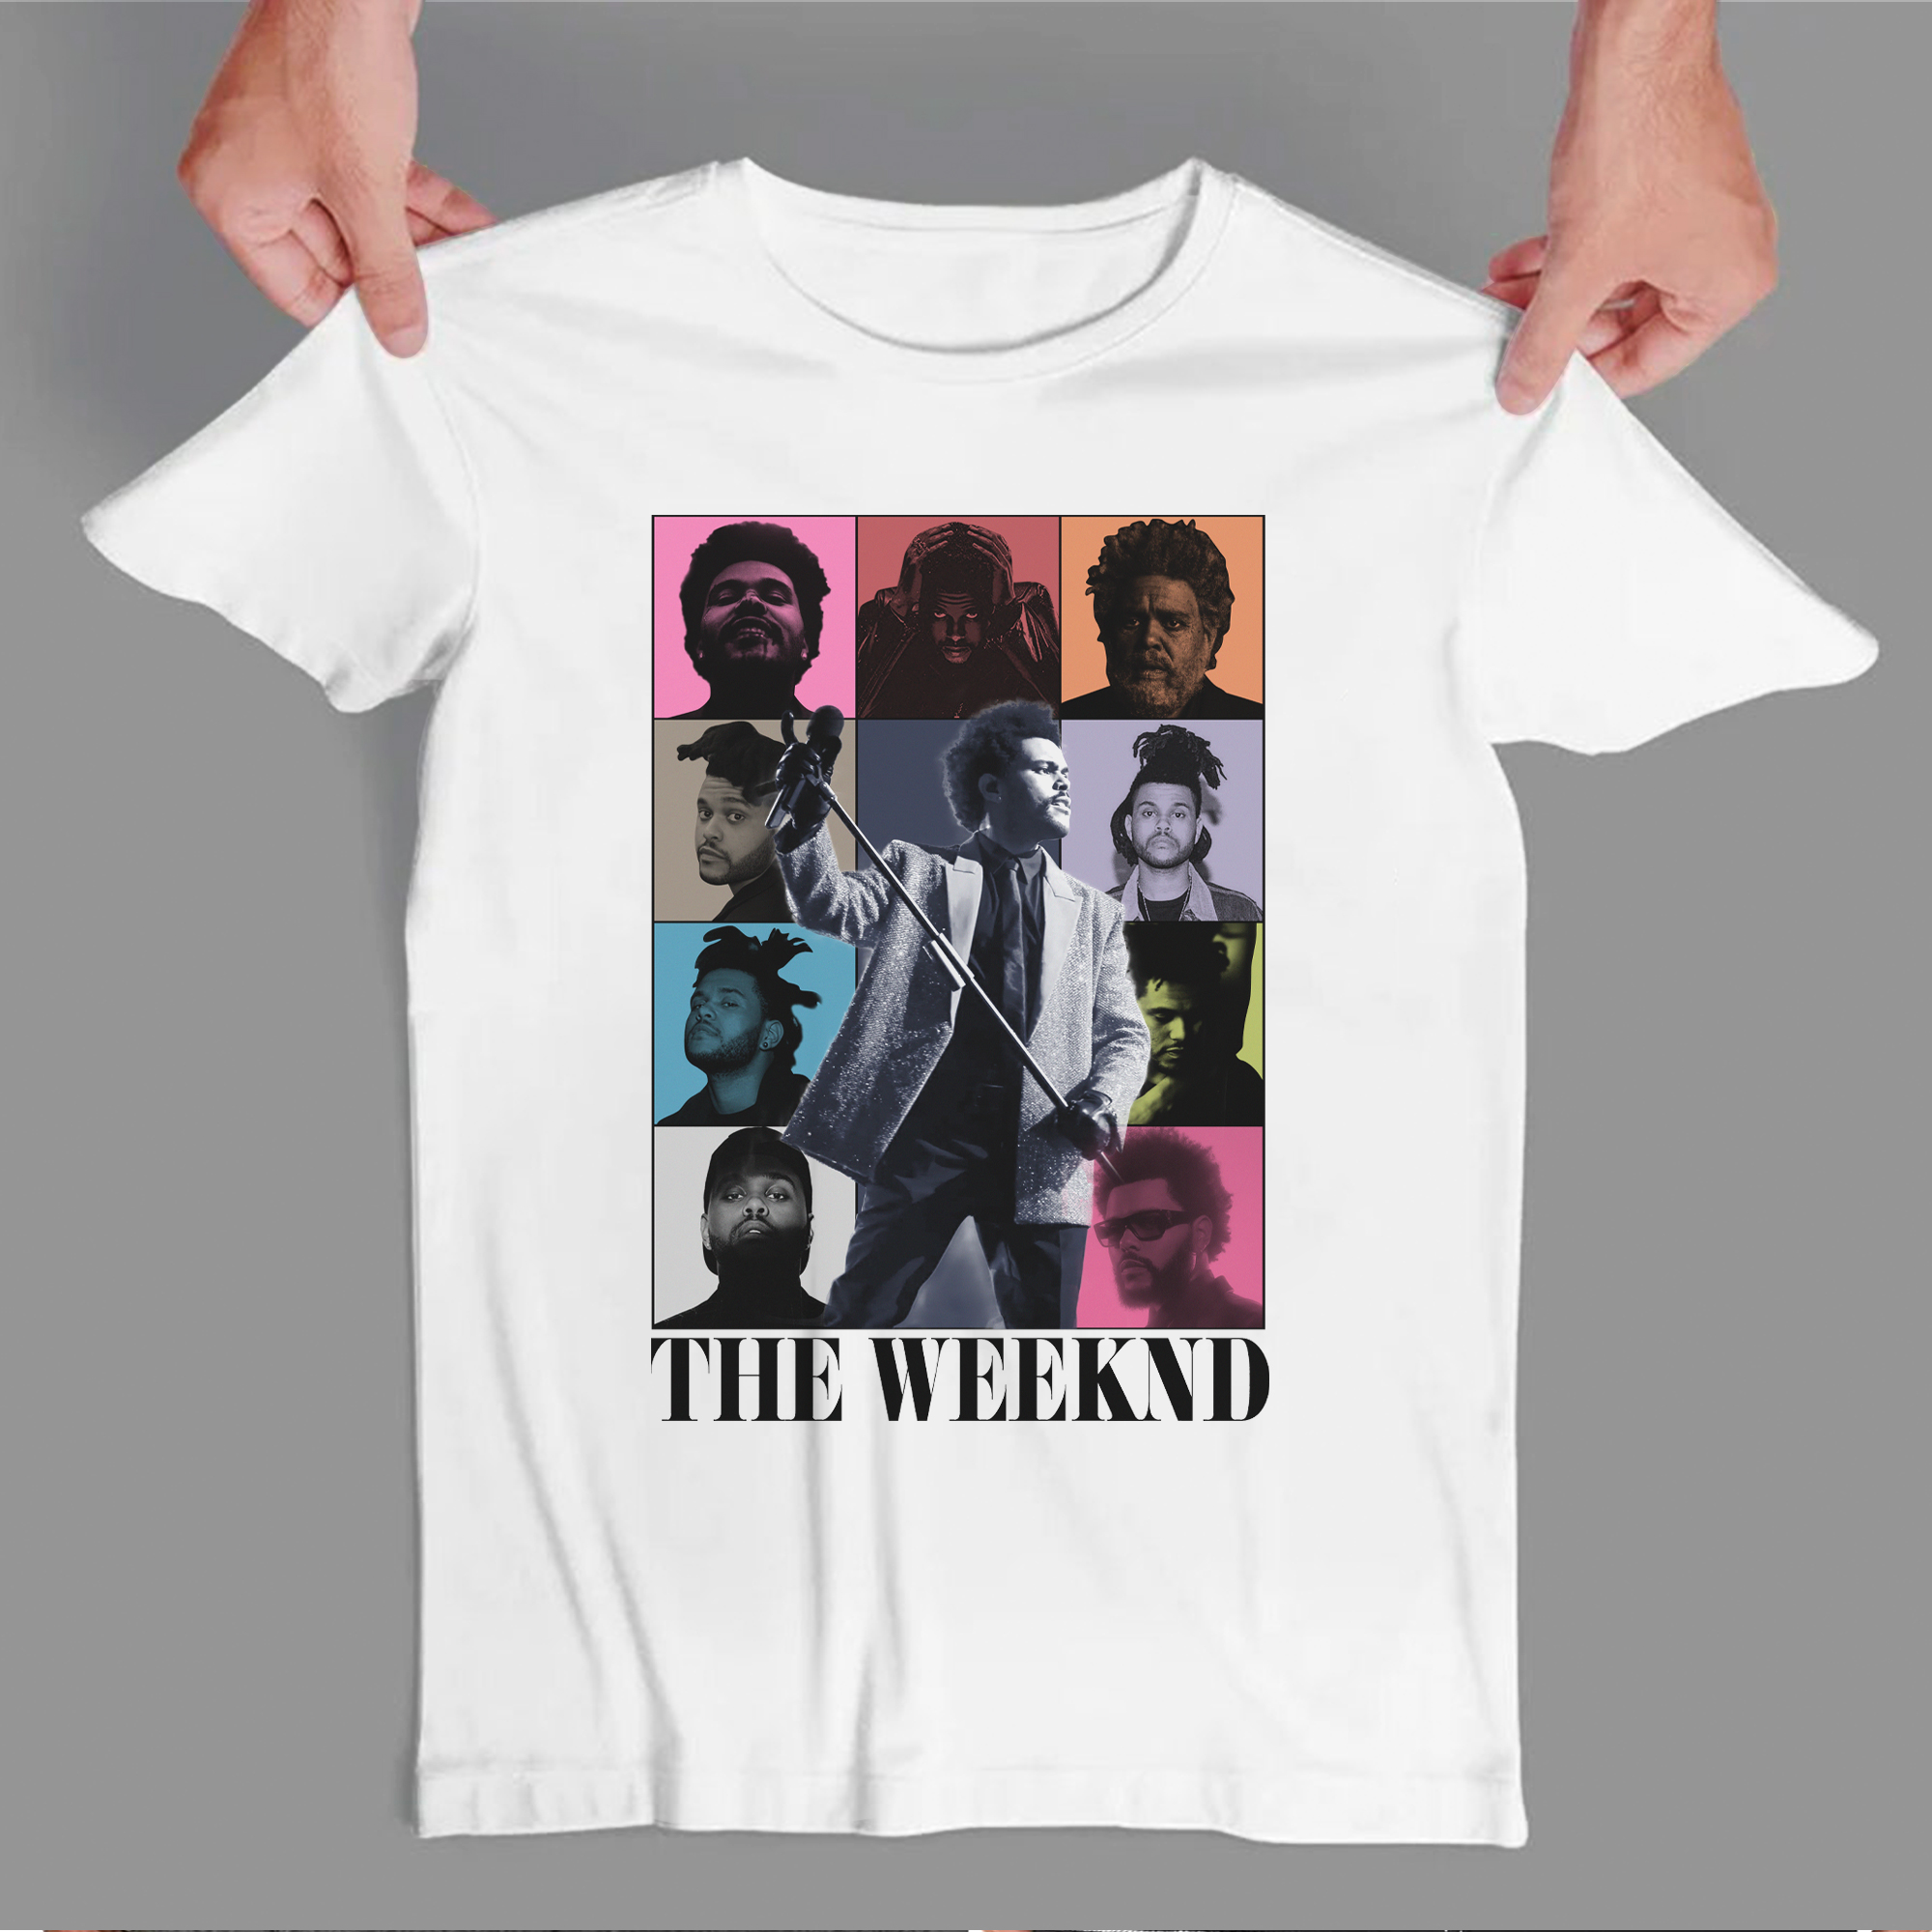 The Weeknd Graphic Tee The Weeknd After Hours Merch The Weeknd